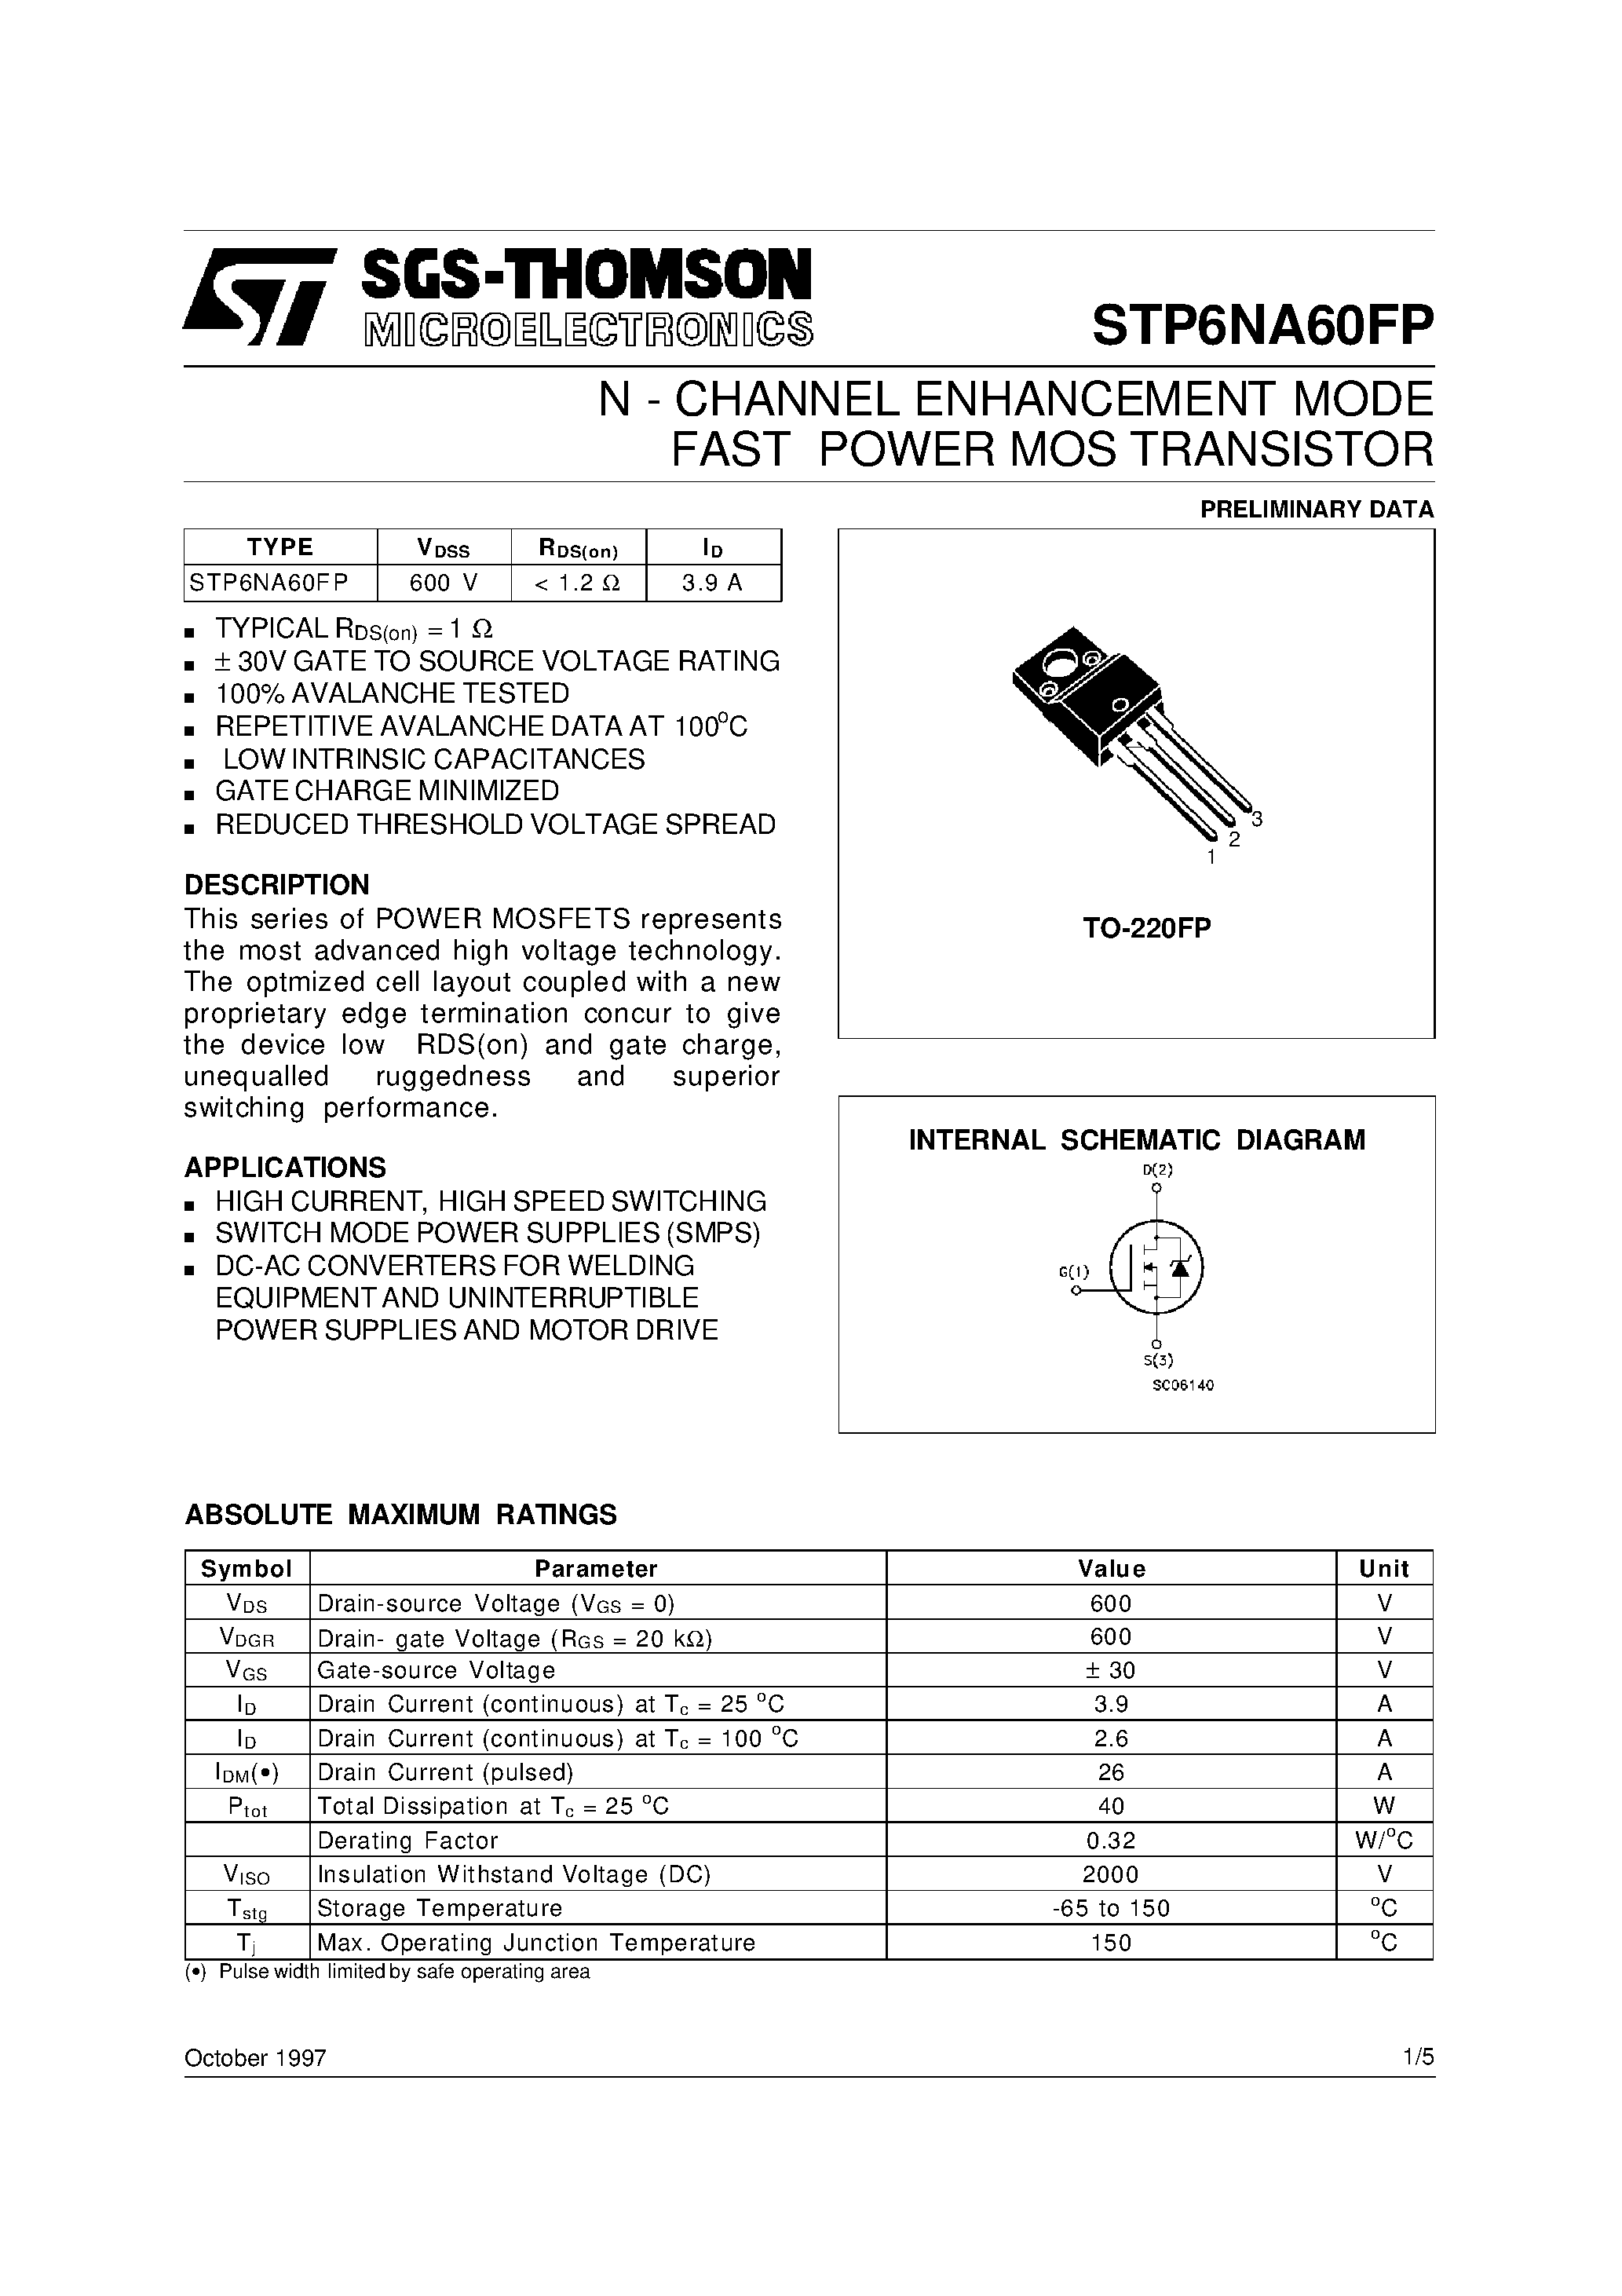 Datasheet STP6NA60FP - N - CHANNEL ENHANCEMENT MODE FAST POWER MOS TRANSISTOR page 1